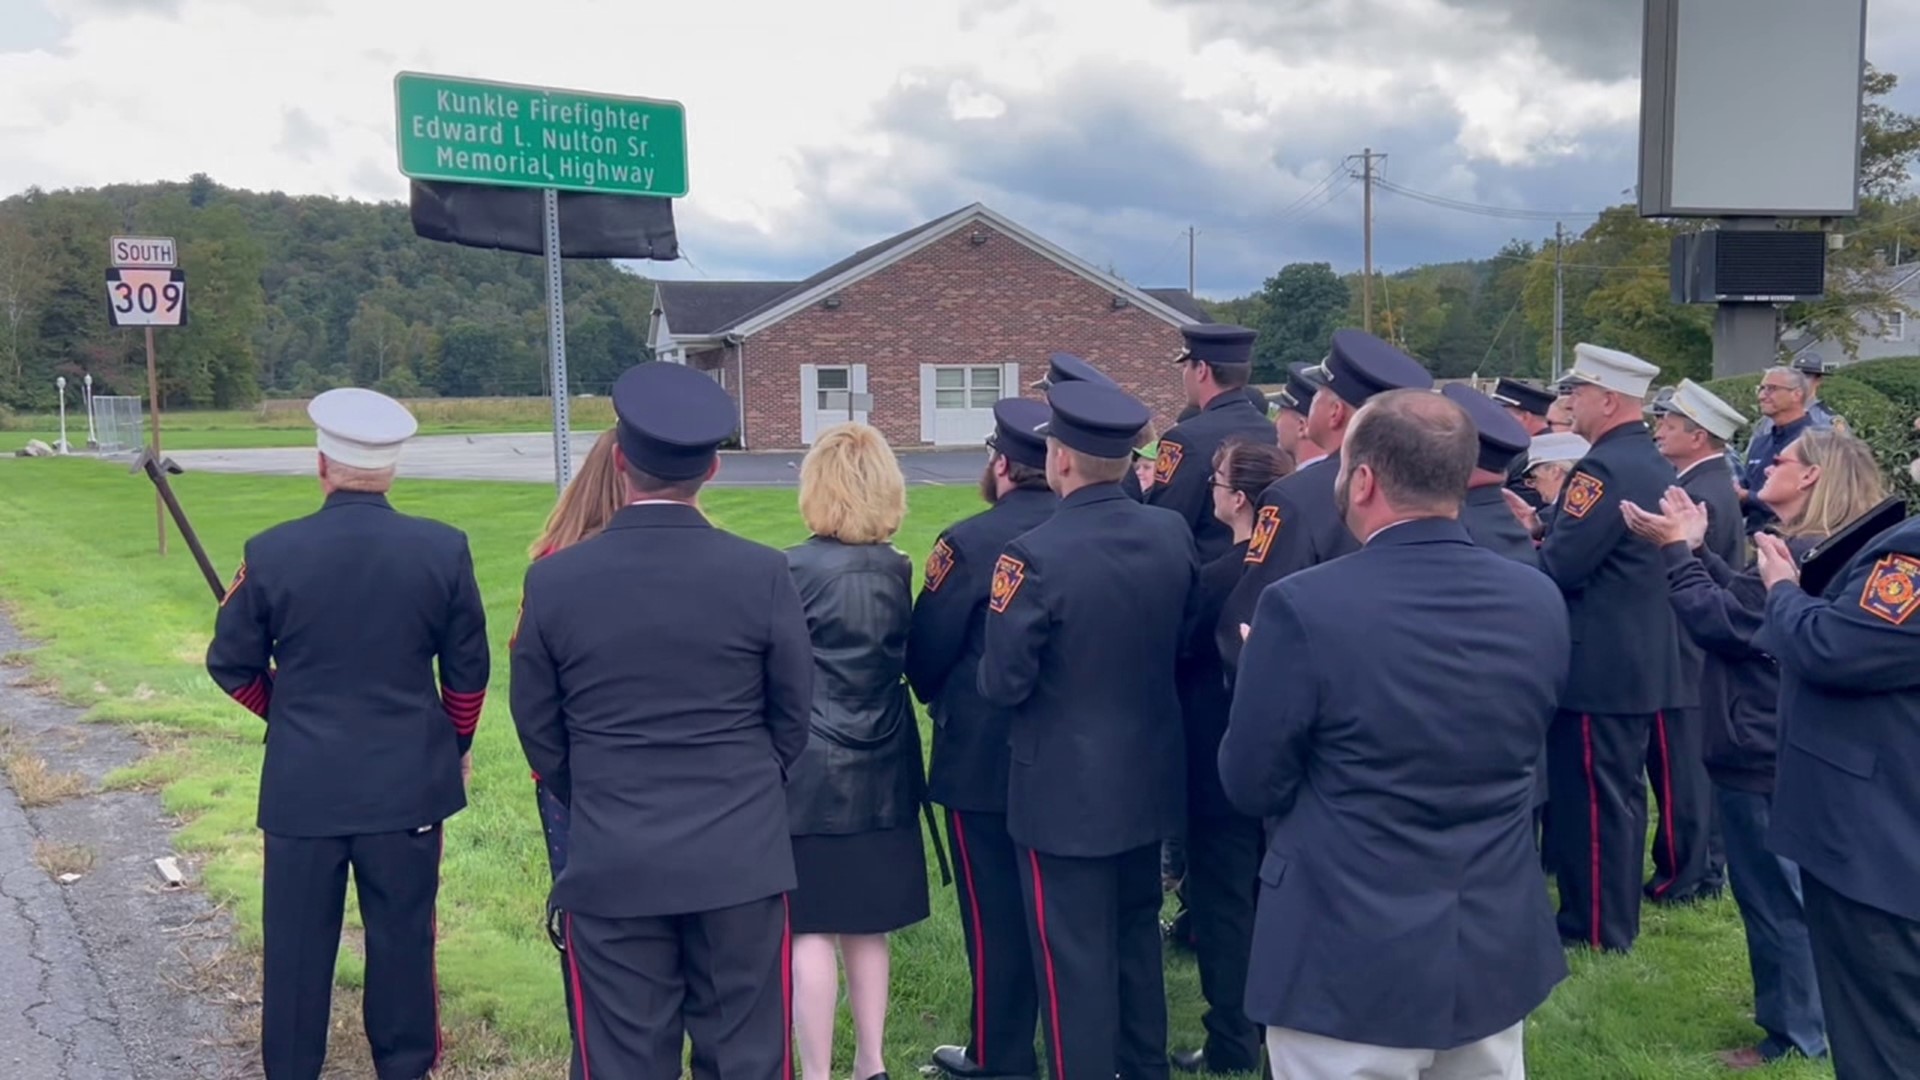 A Wyoming County firefighter suffered serious injuries in the line of duty and later died. The roadway from the scene to his fire station now bears his name.